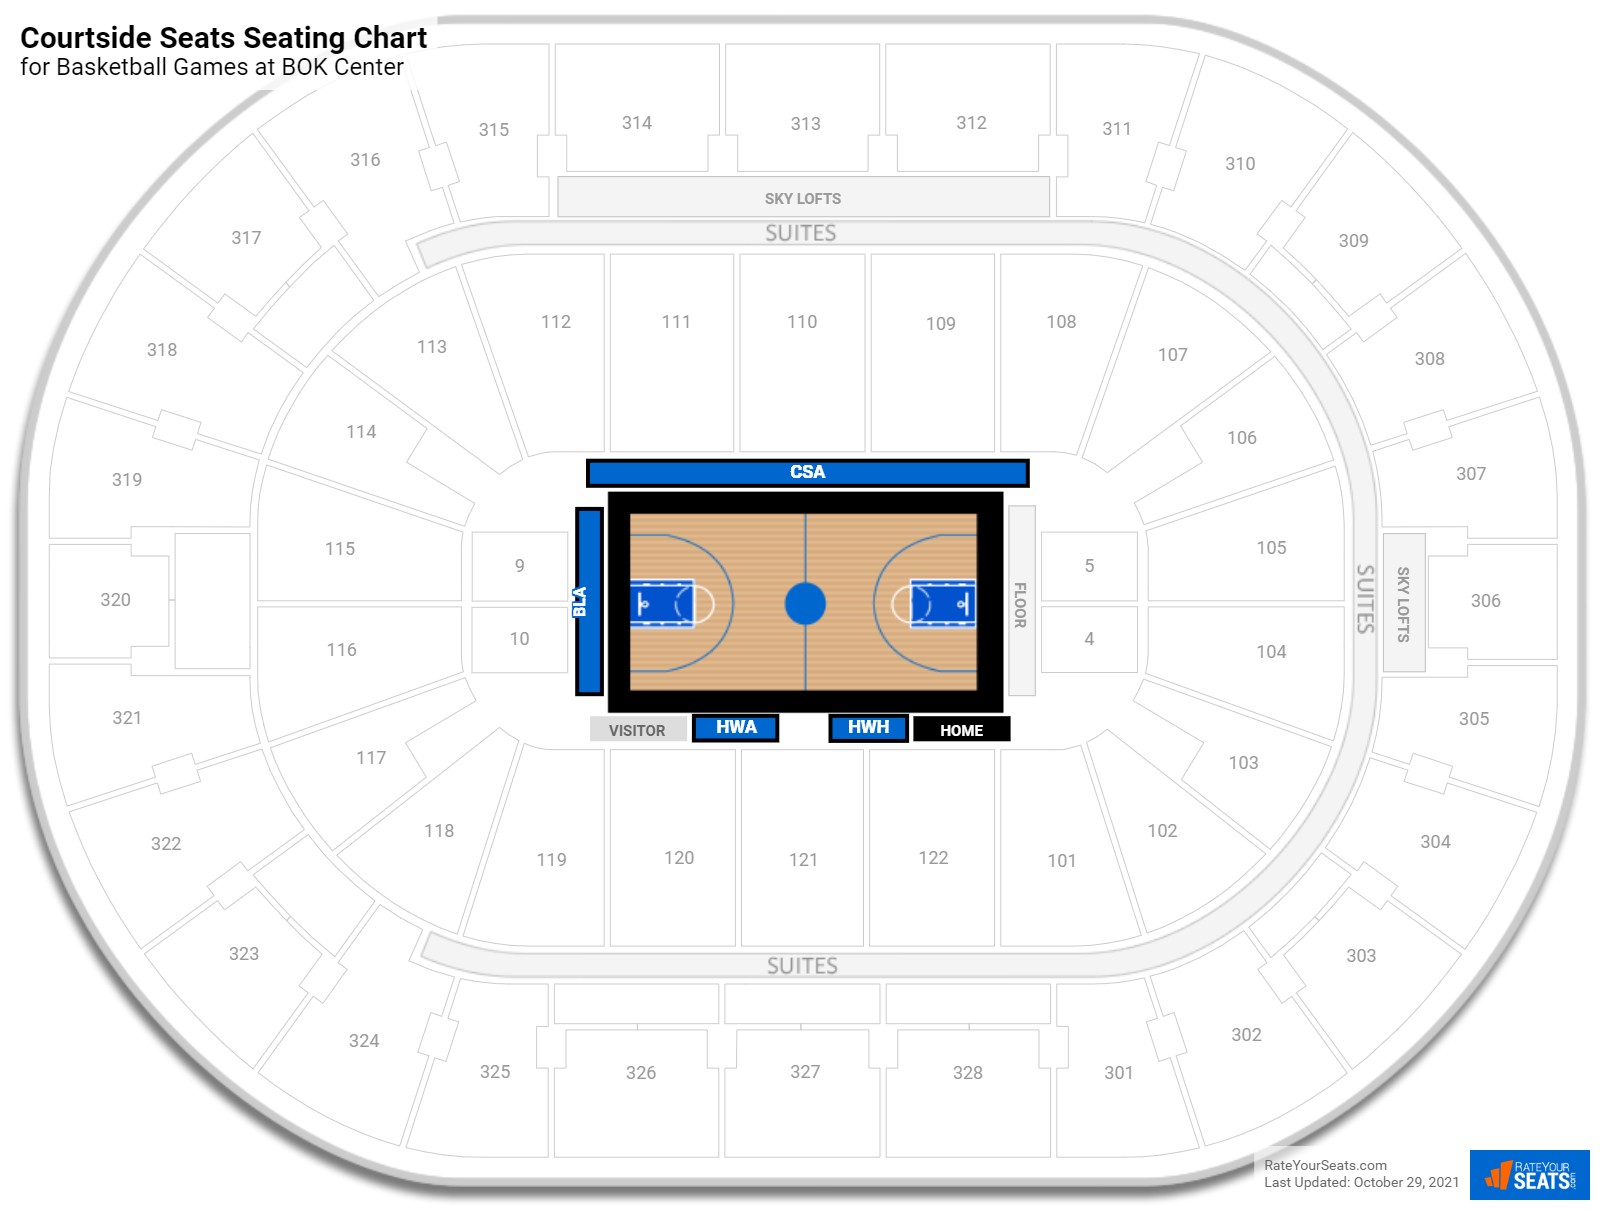 Basketball Courtside Seats Seating Chart at BOK Center